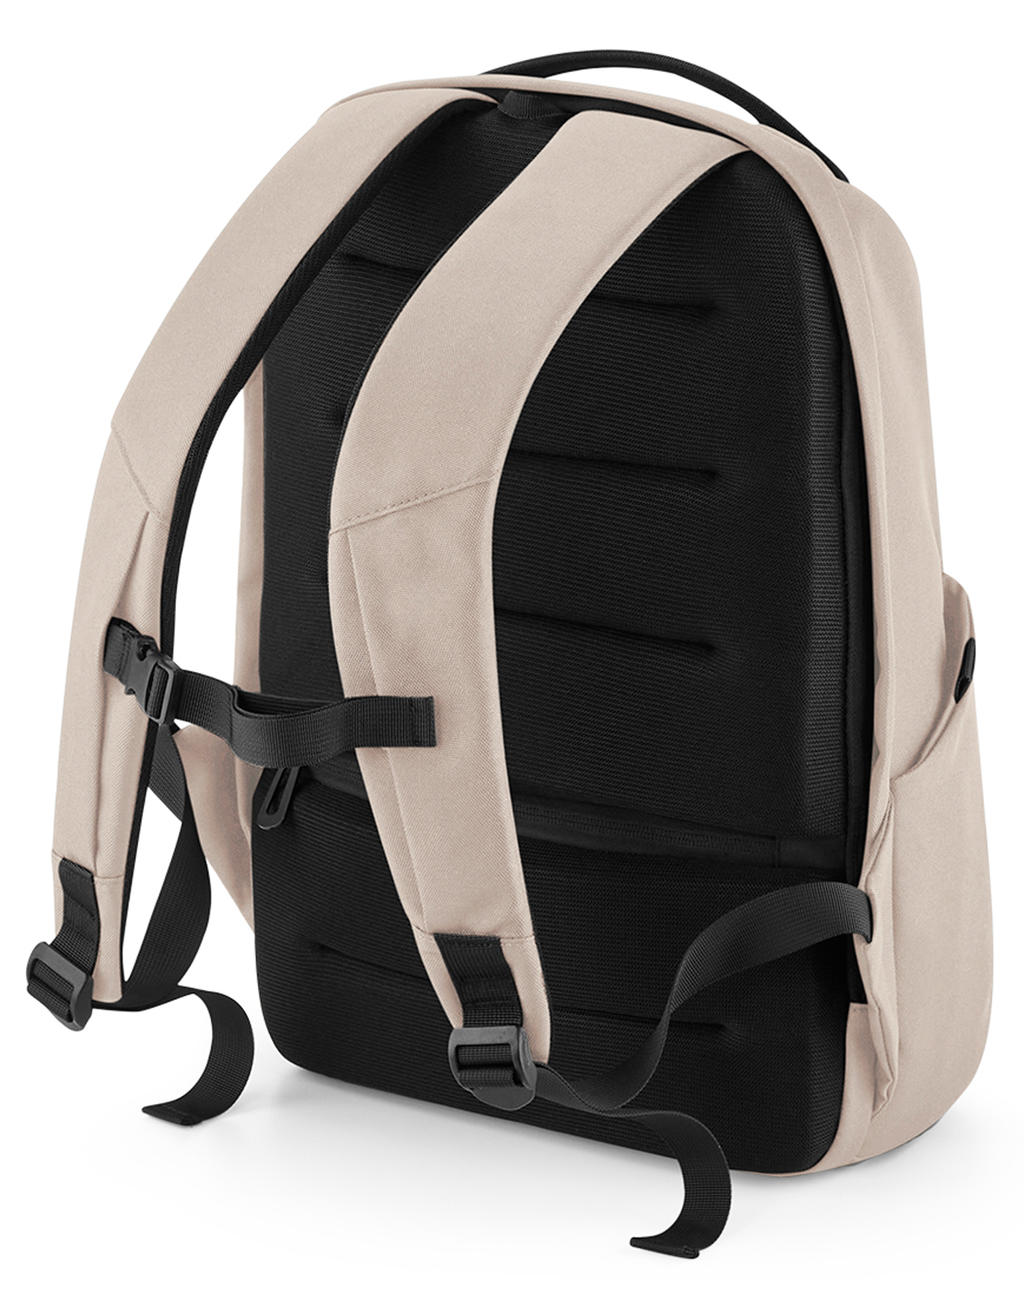  Project Recycled Security Backpack Lite<P/> in Farbe Black